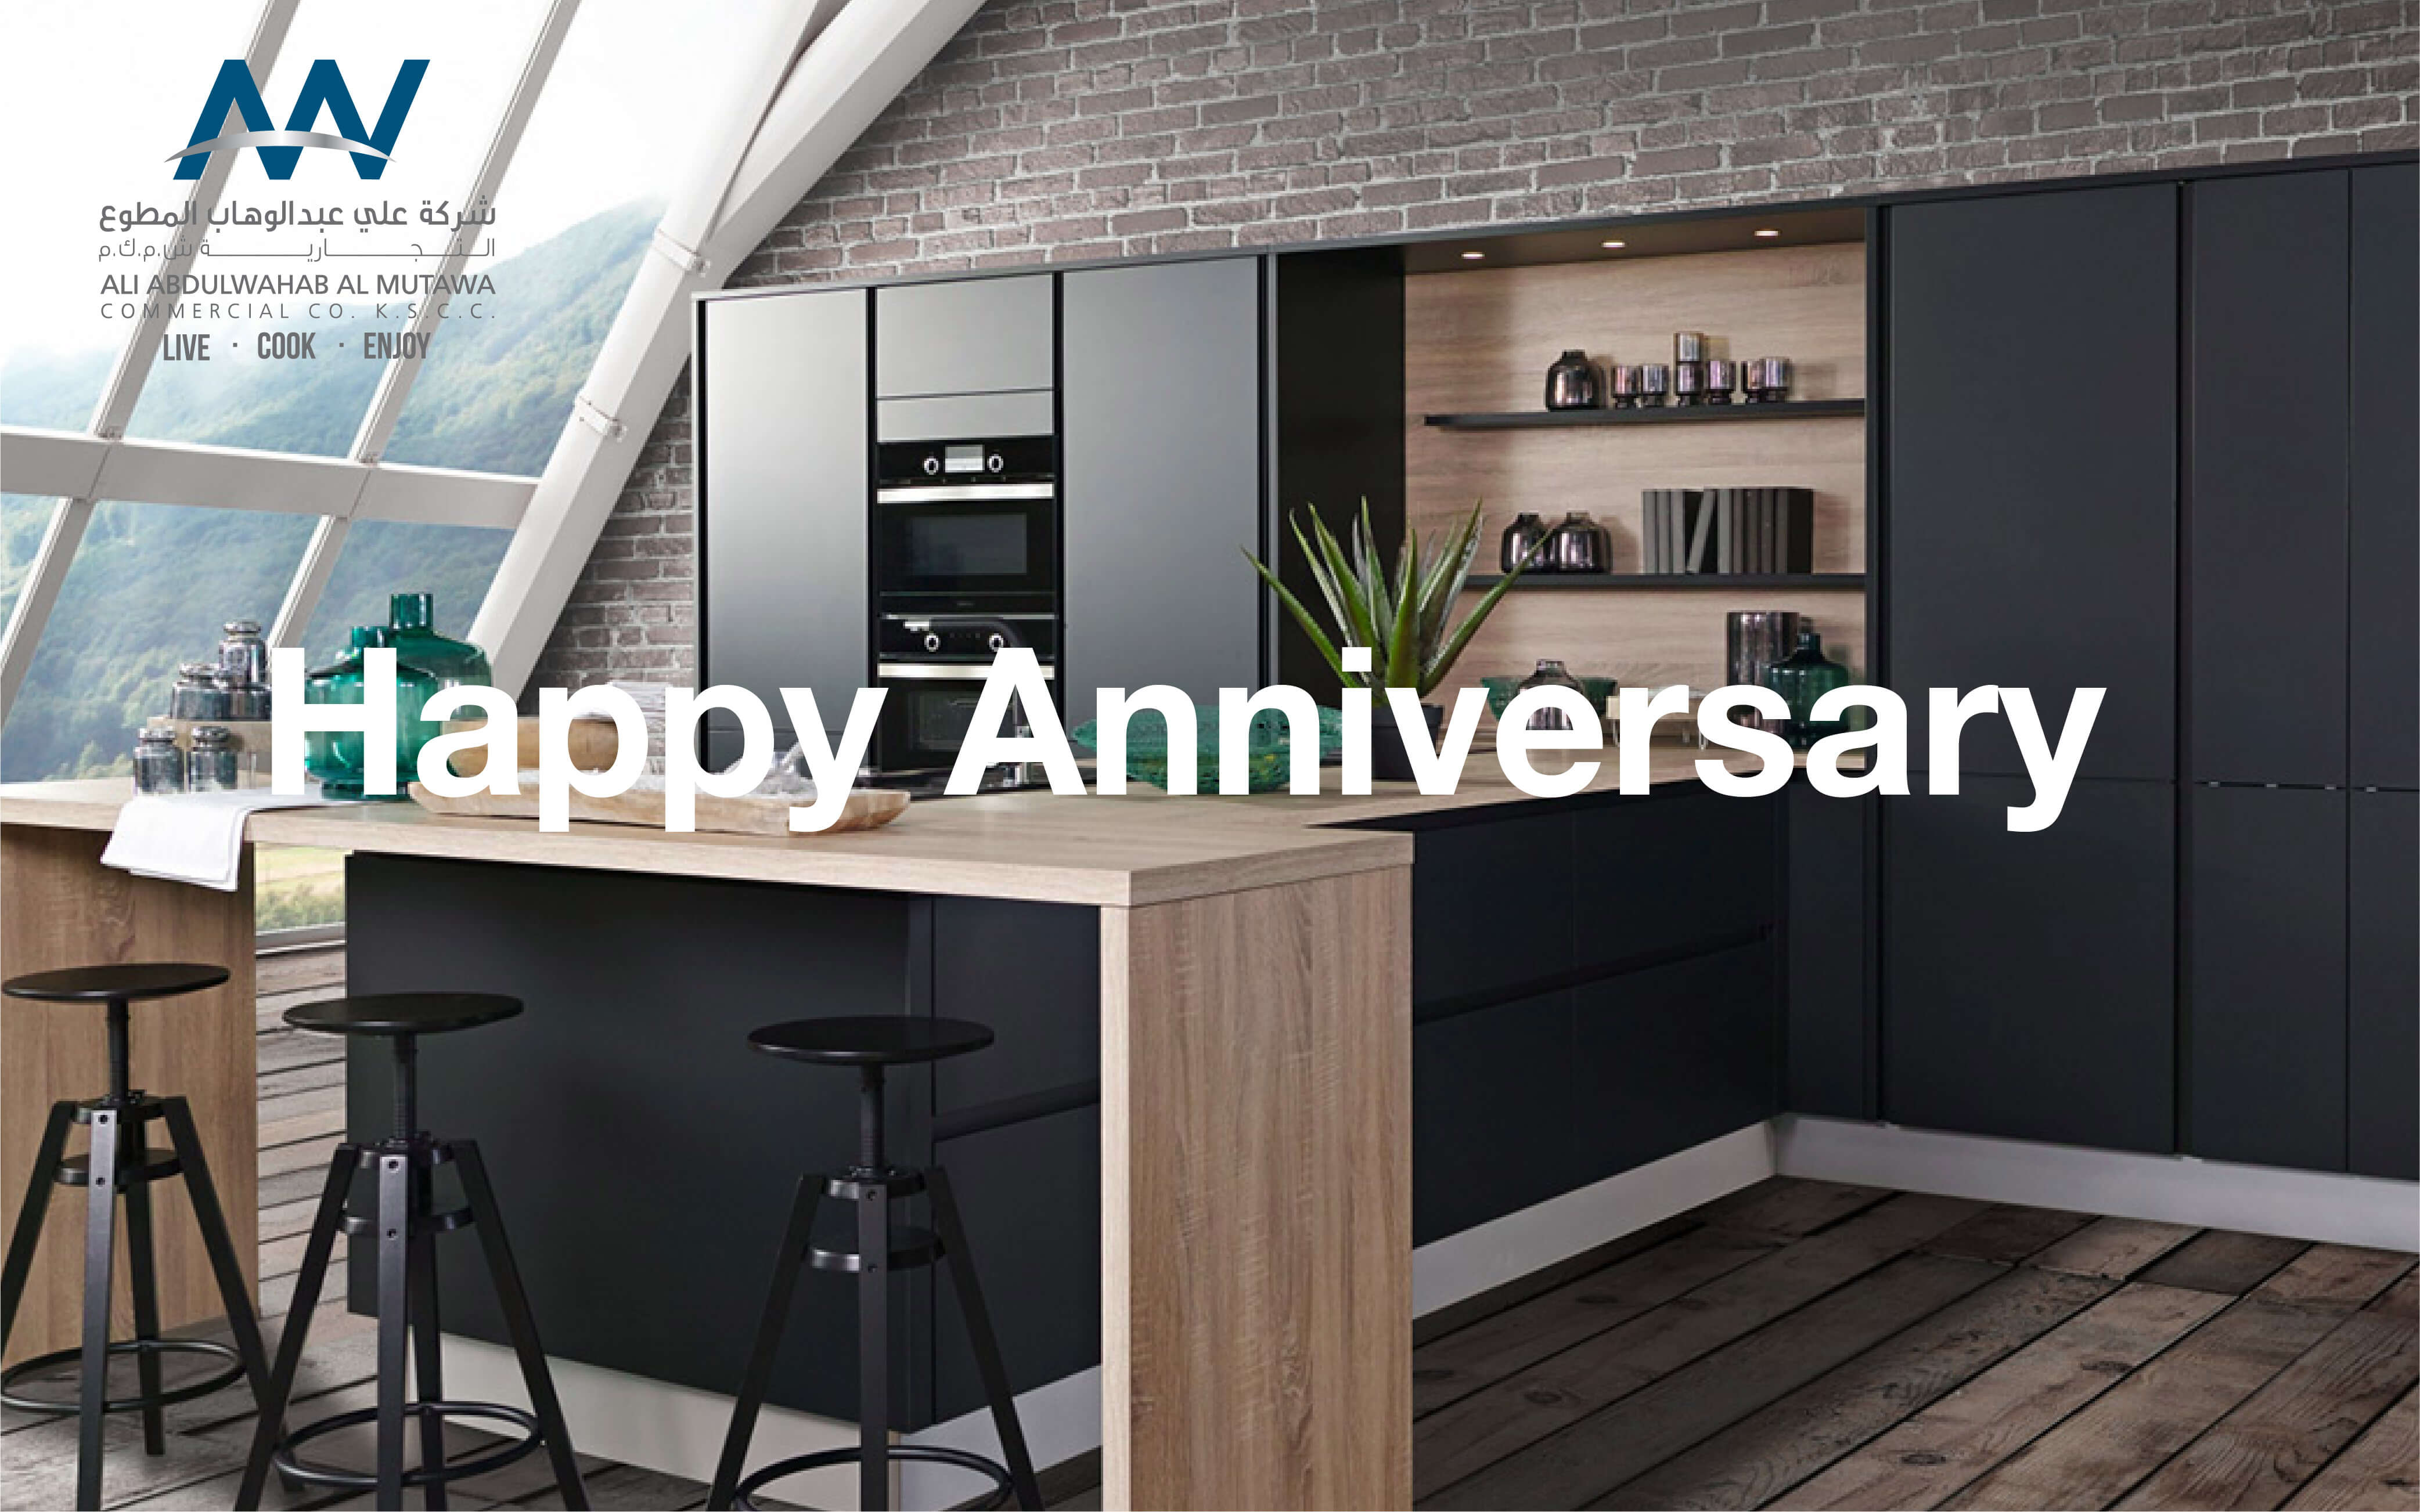 Happy Anniversary Giftcard AAW Kitchens